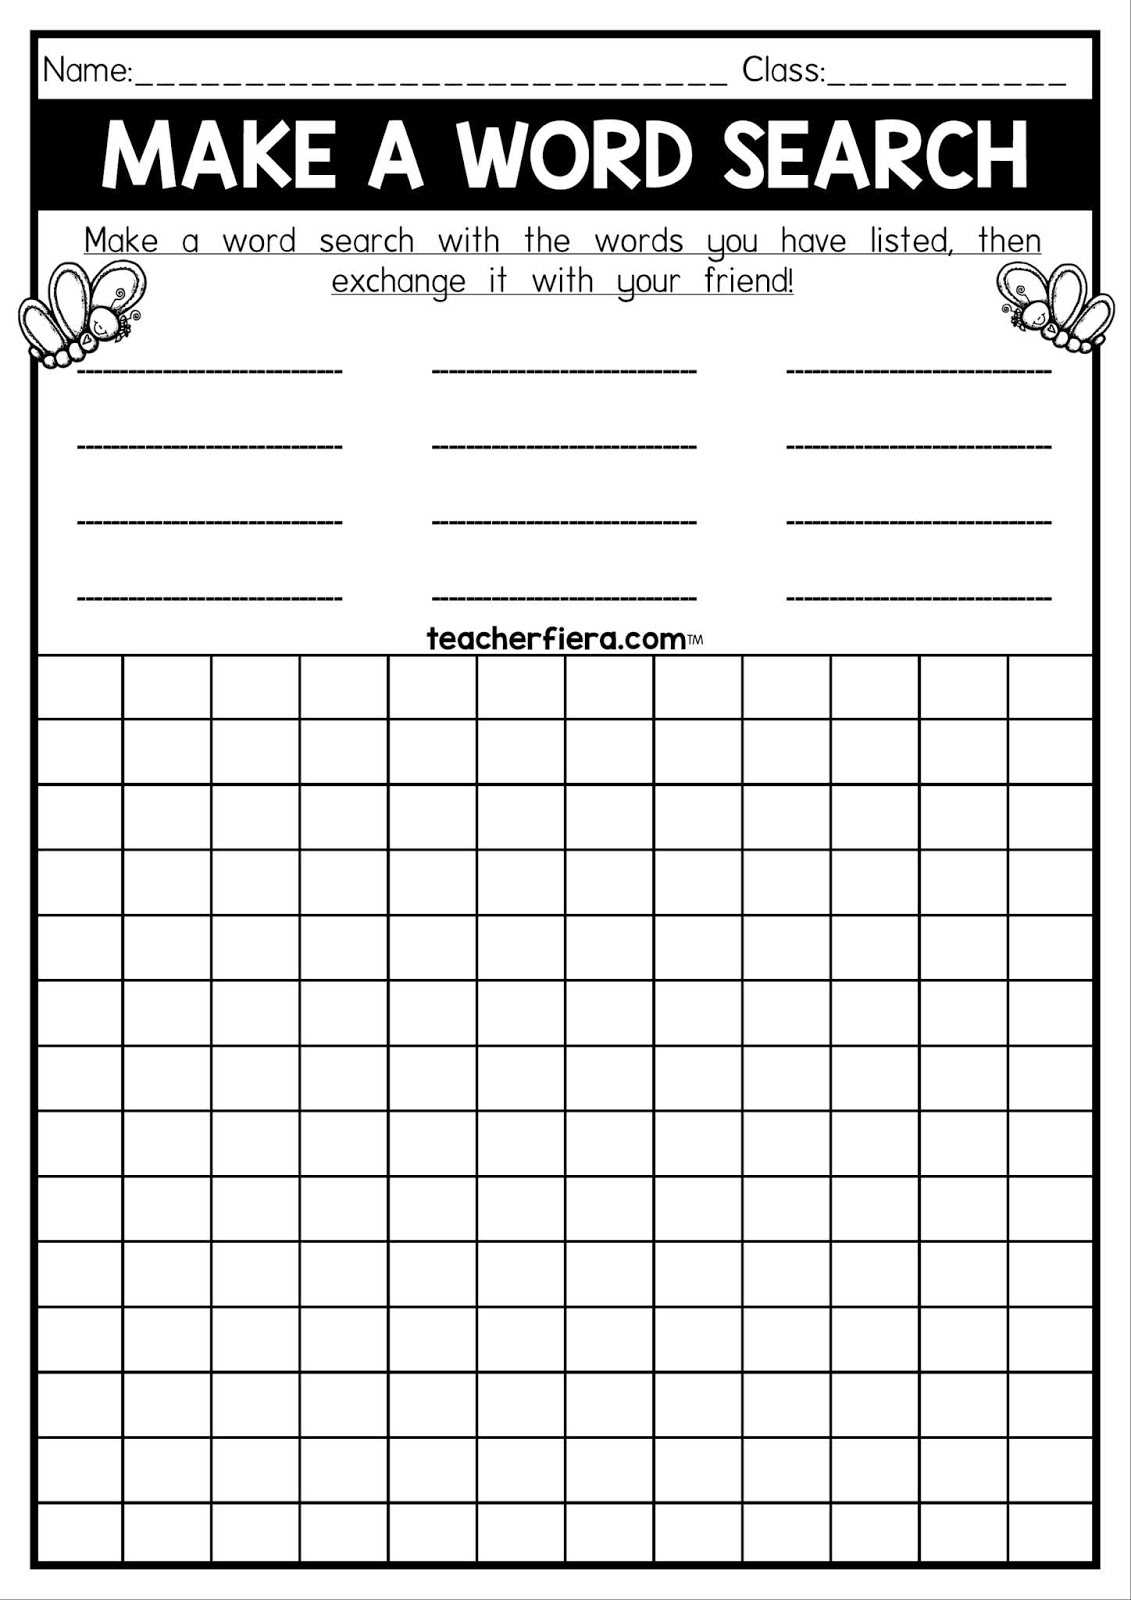 Teacherfiera: Make A Word Search With Regard To Word Sleuth Template